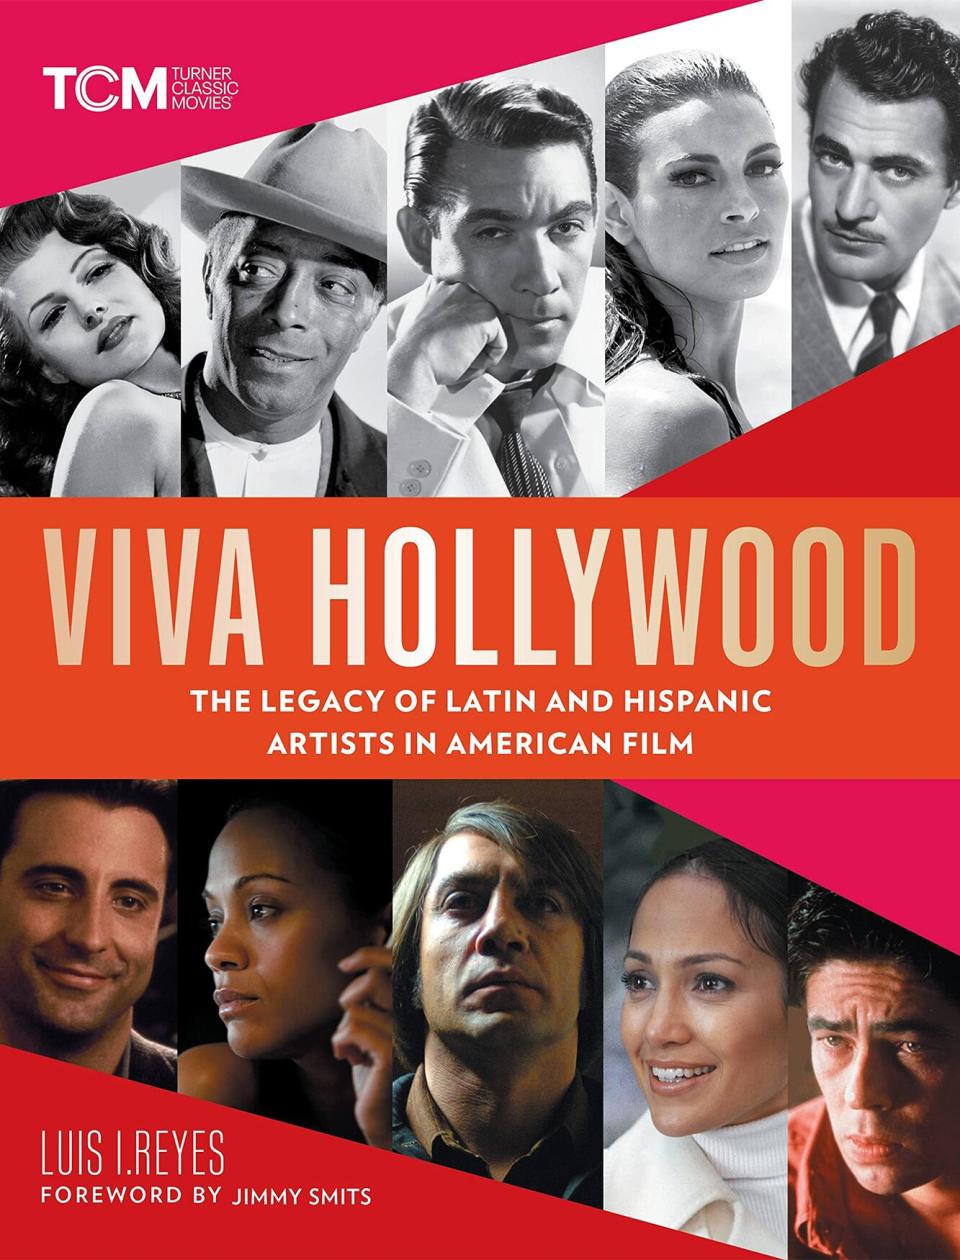 Viva Hollywood: The Legacy of Latin and Hispanic Artists in American Film by Luis I. Reyes